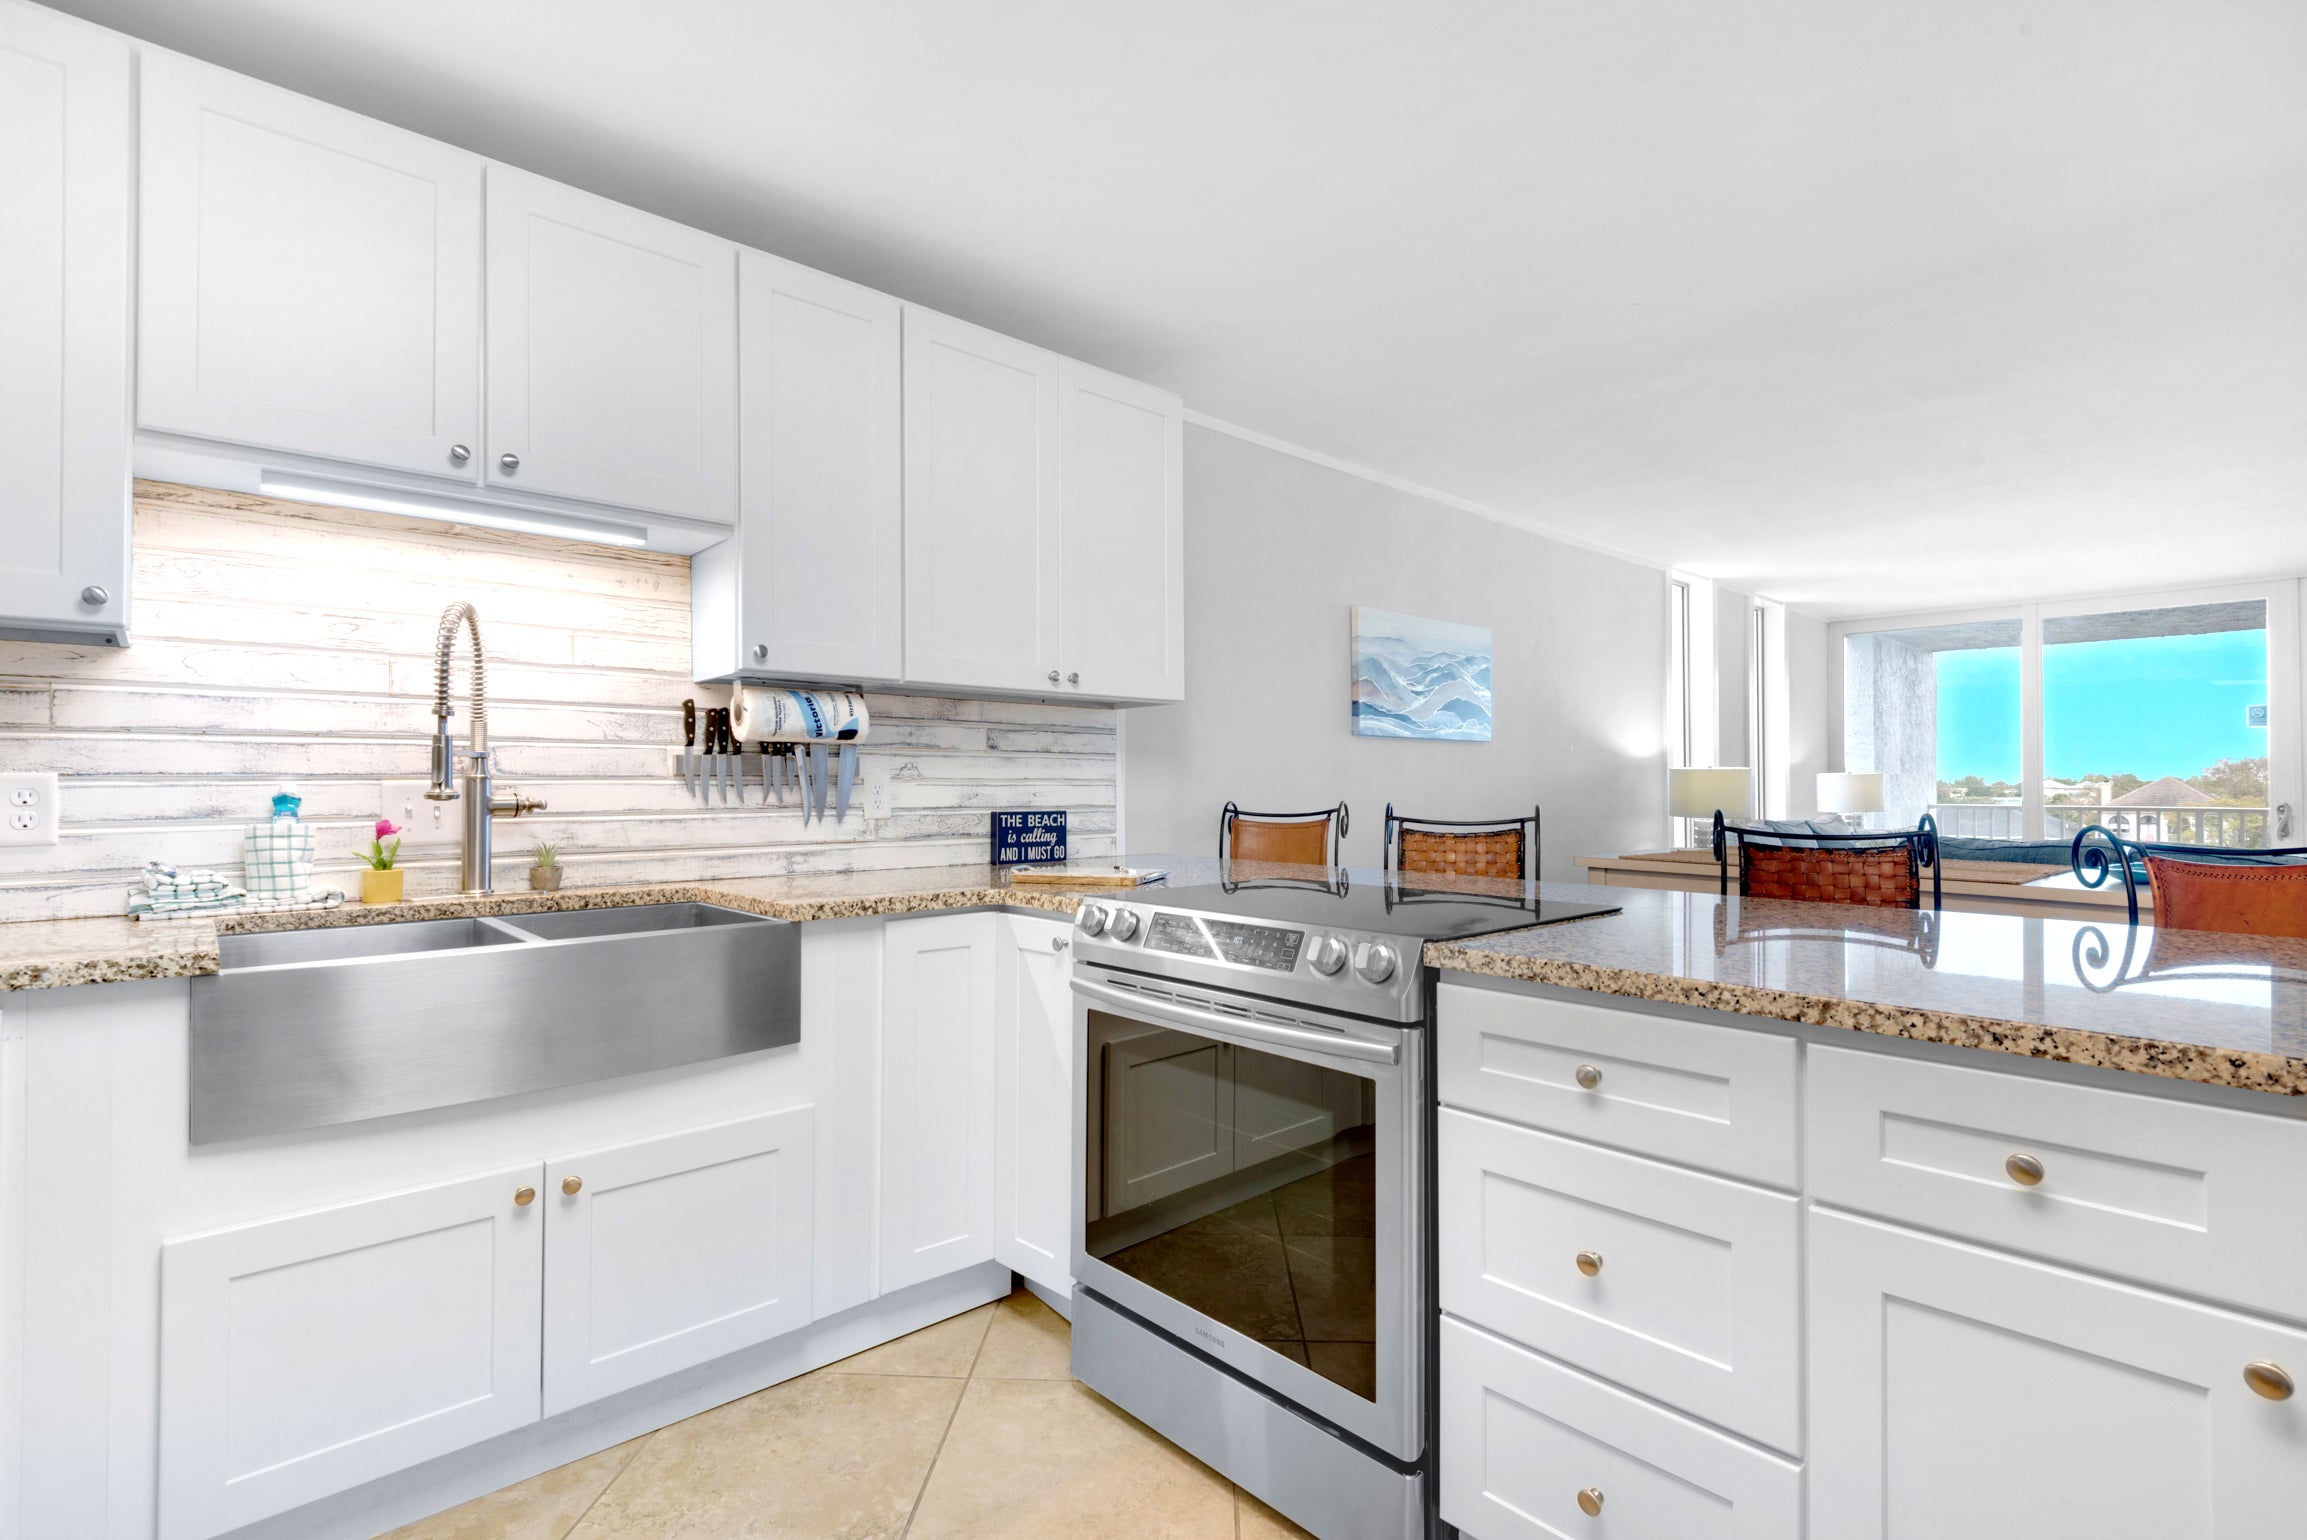 Gorgeous Updated Kitchen - Granite Counter tops